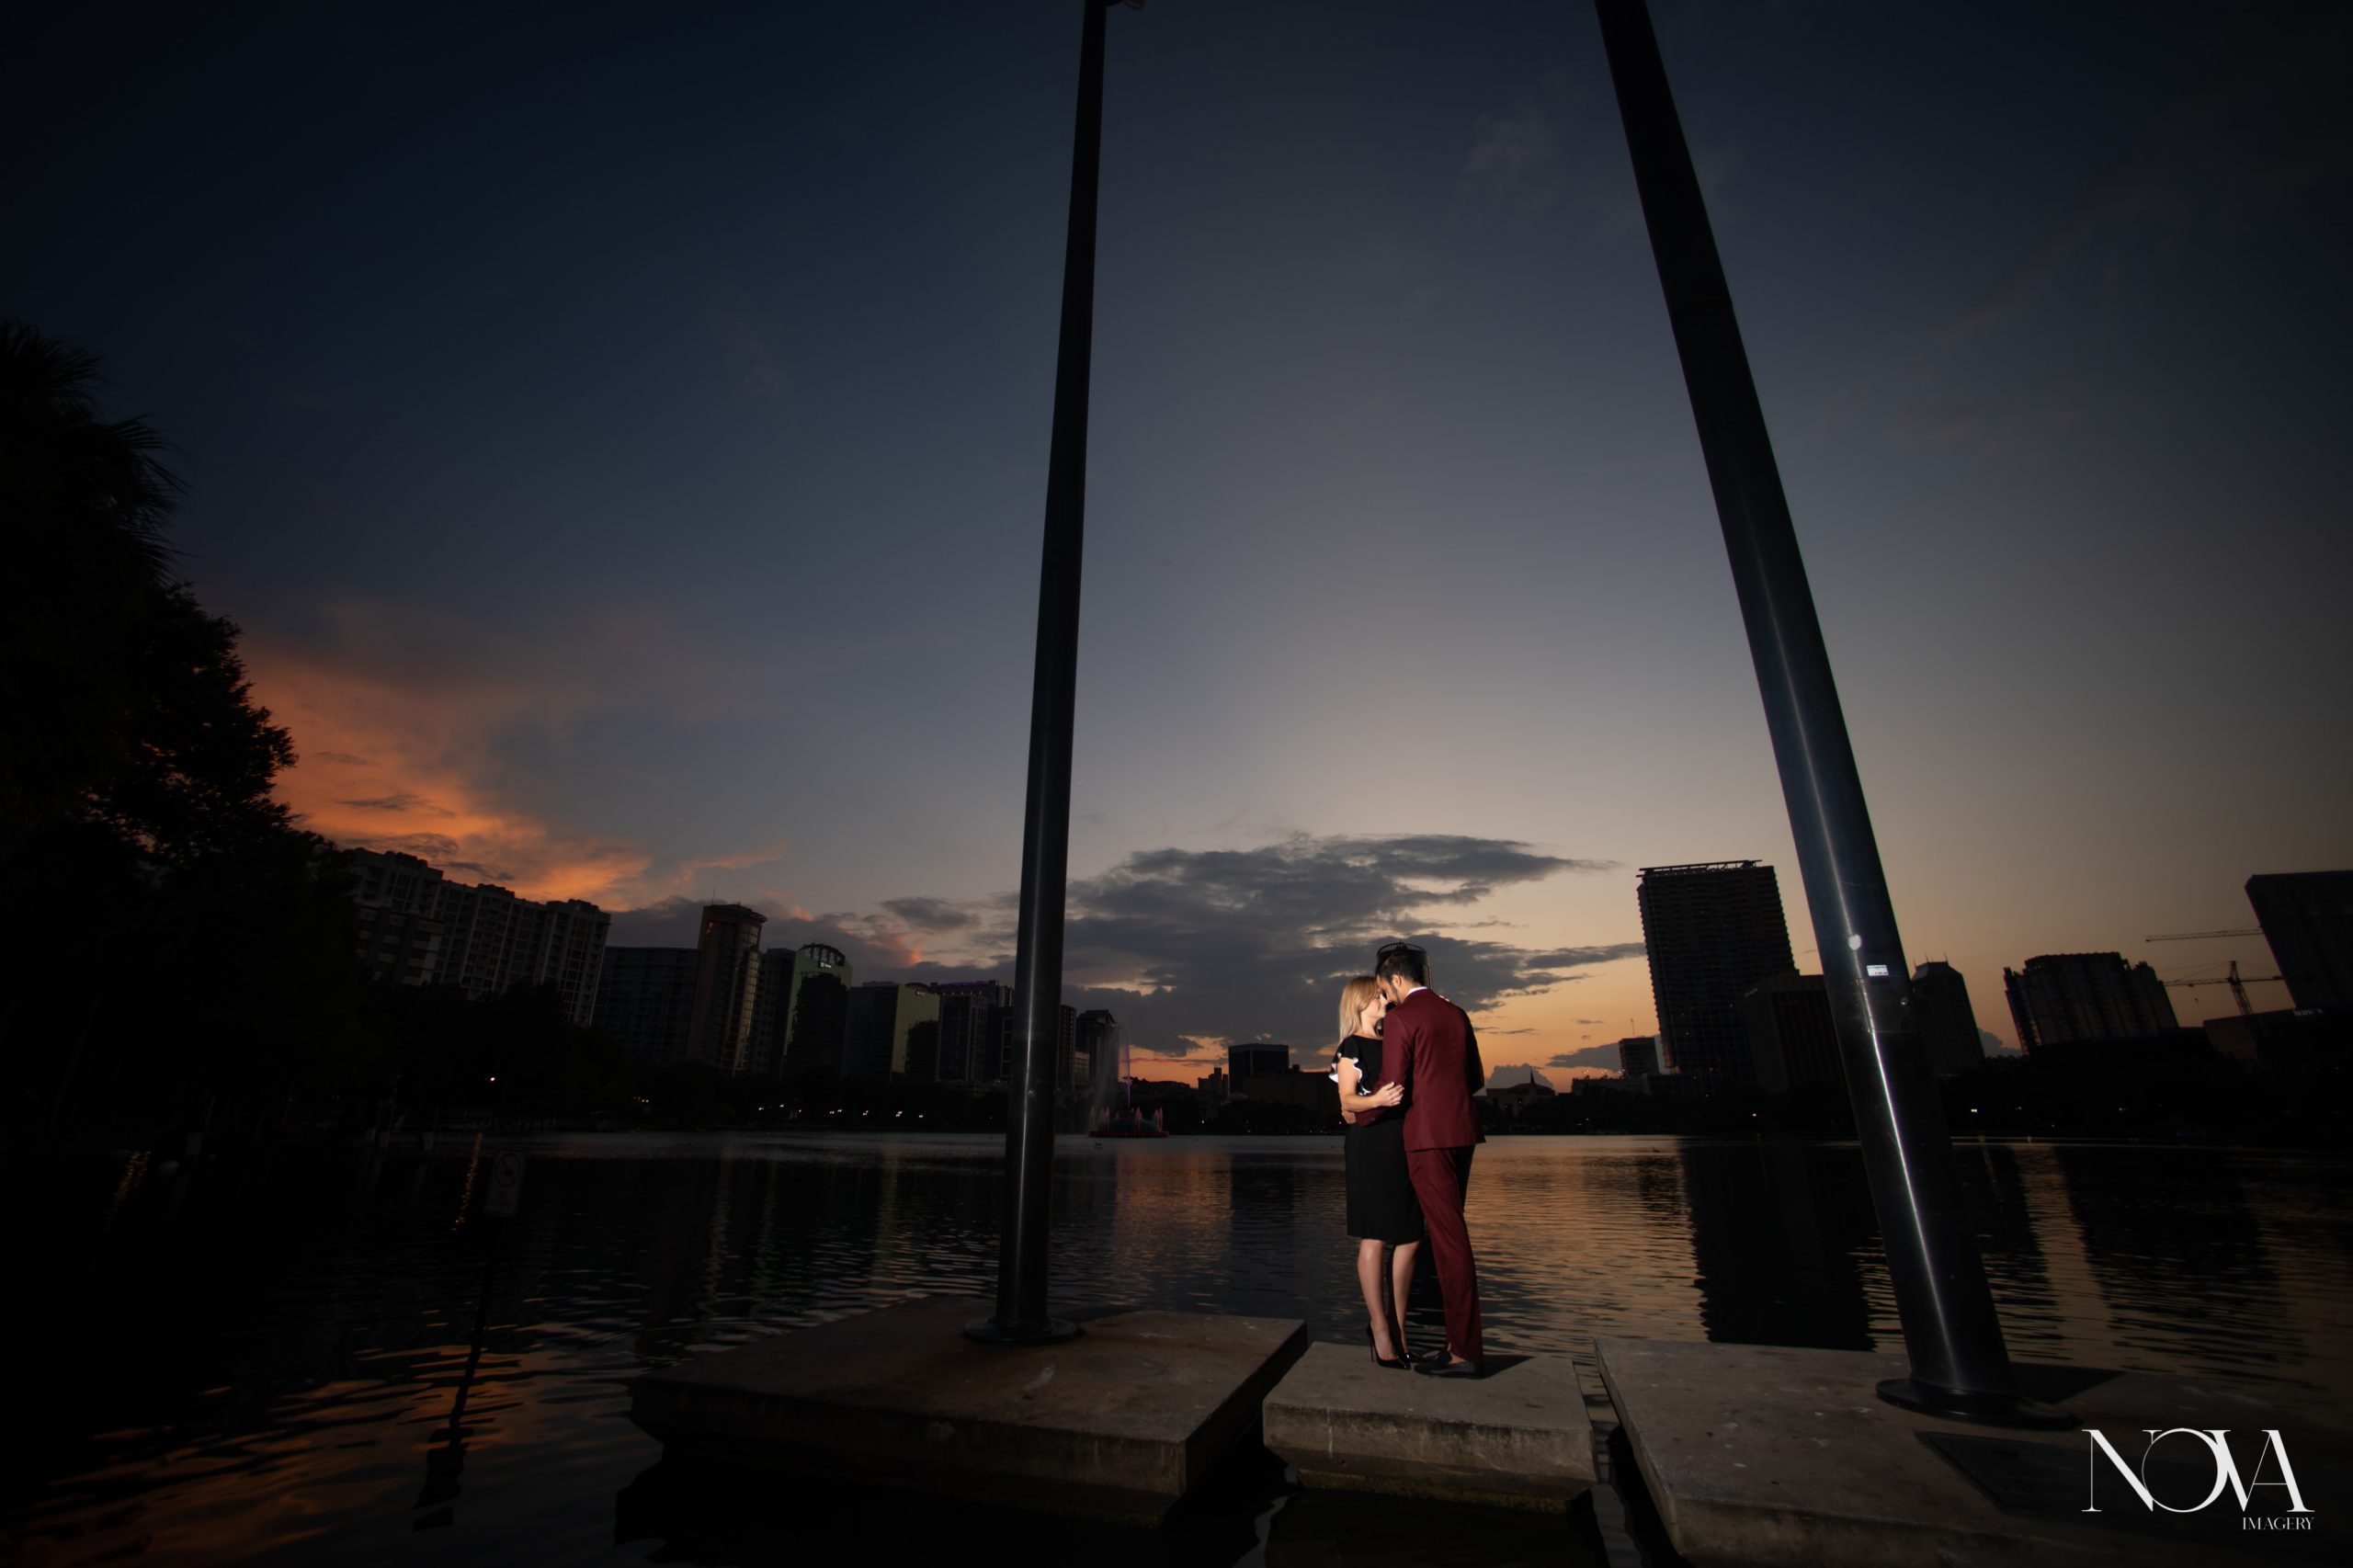 Couple hugging each other during their sunset Lake Eola engagement session.